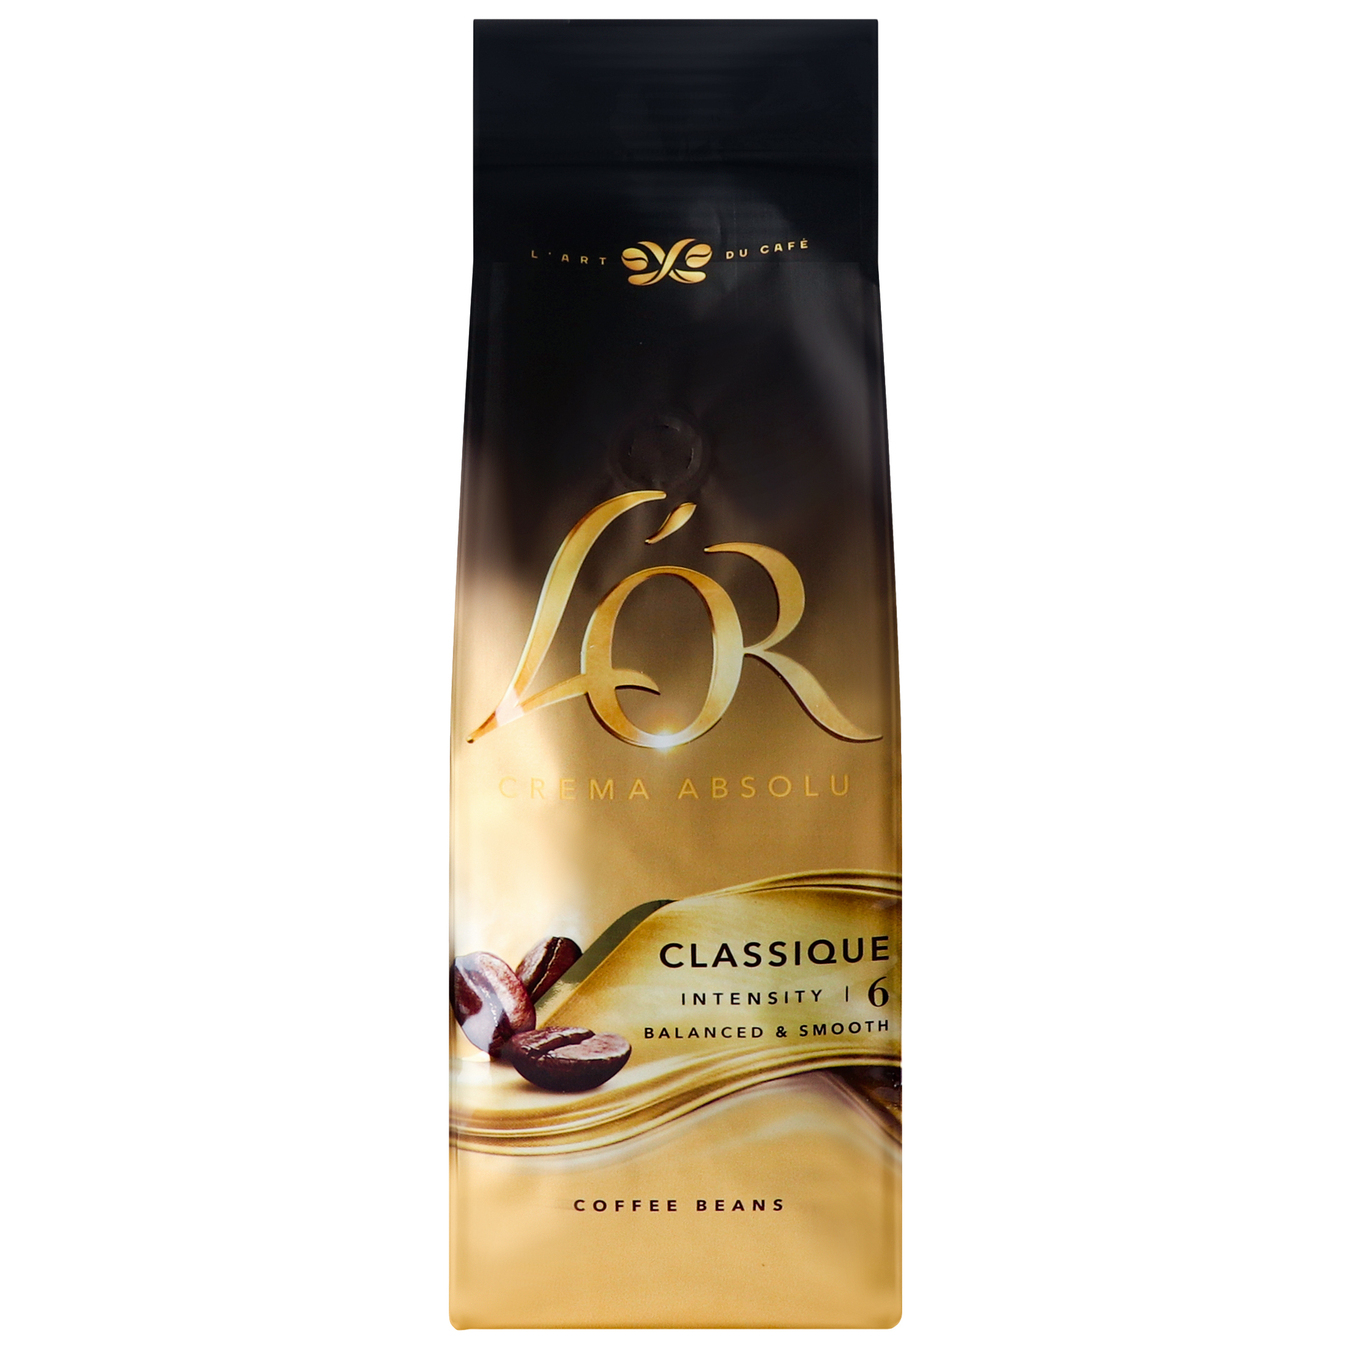 L'or Crema Absolute Classic Coffee Beans 500g